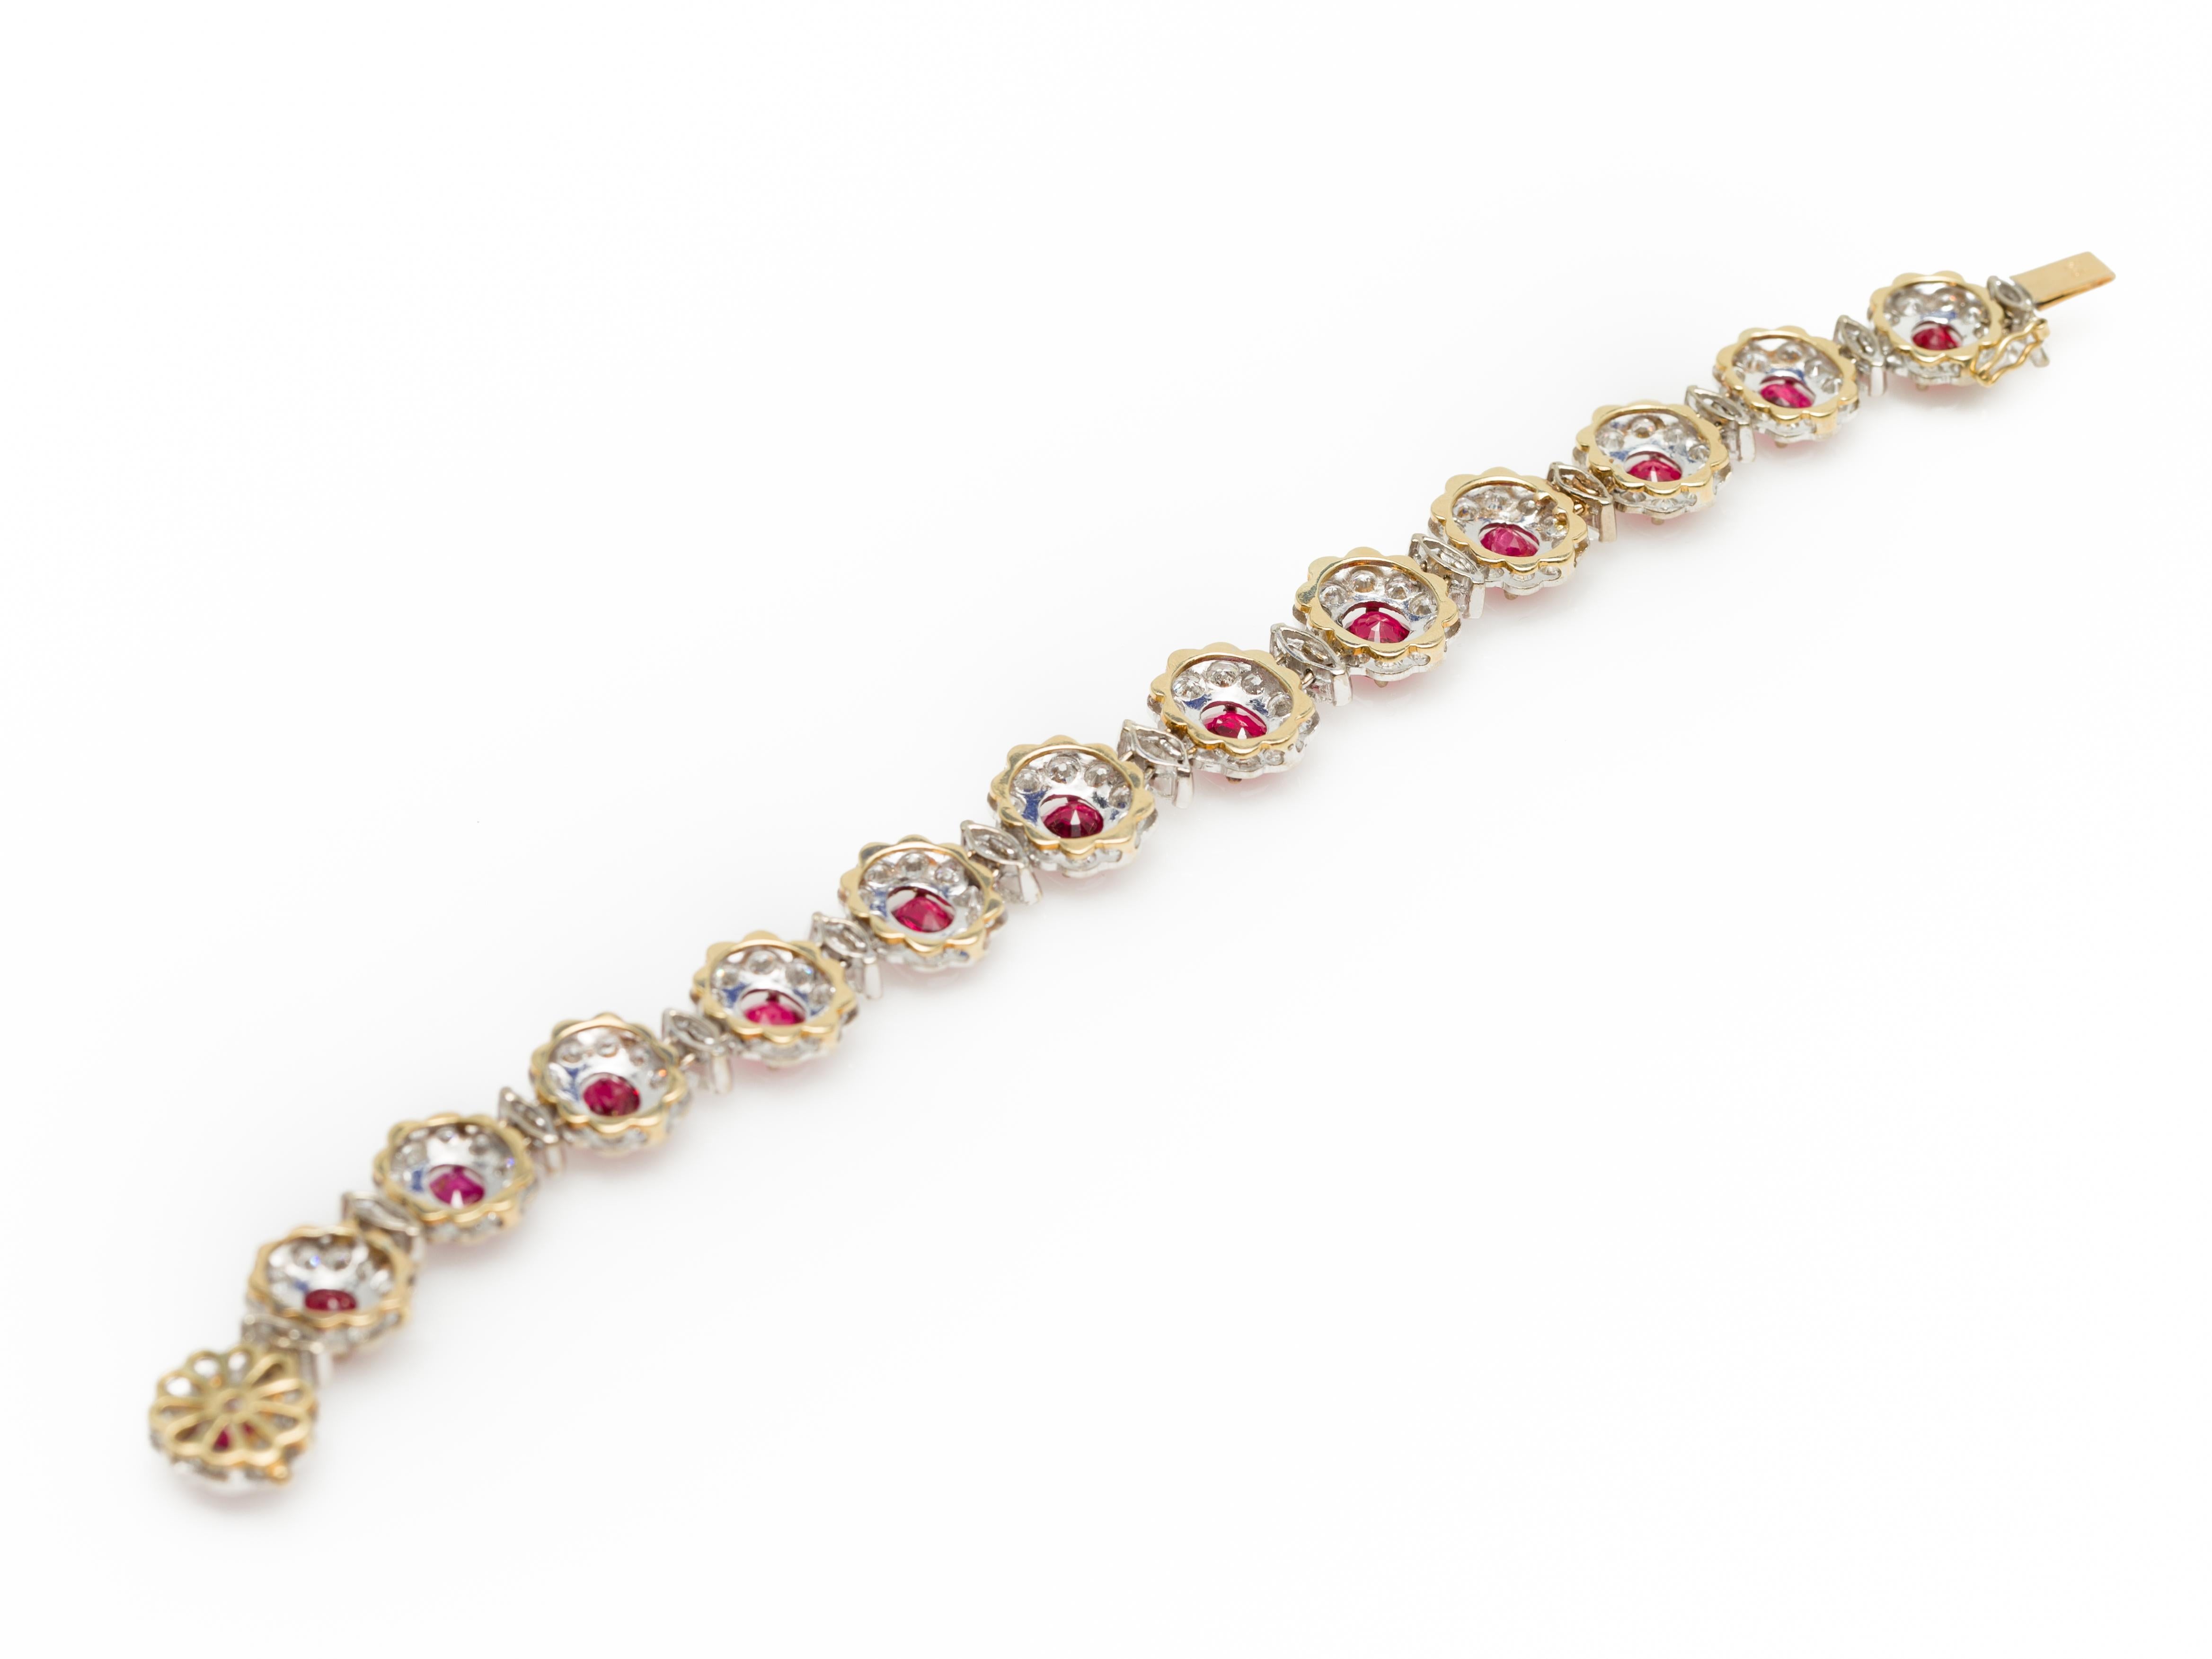 10.60 Carat Diamond and 10.25 Carat Spinel Bracelet in 18K Yellow and White Gold 3